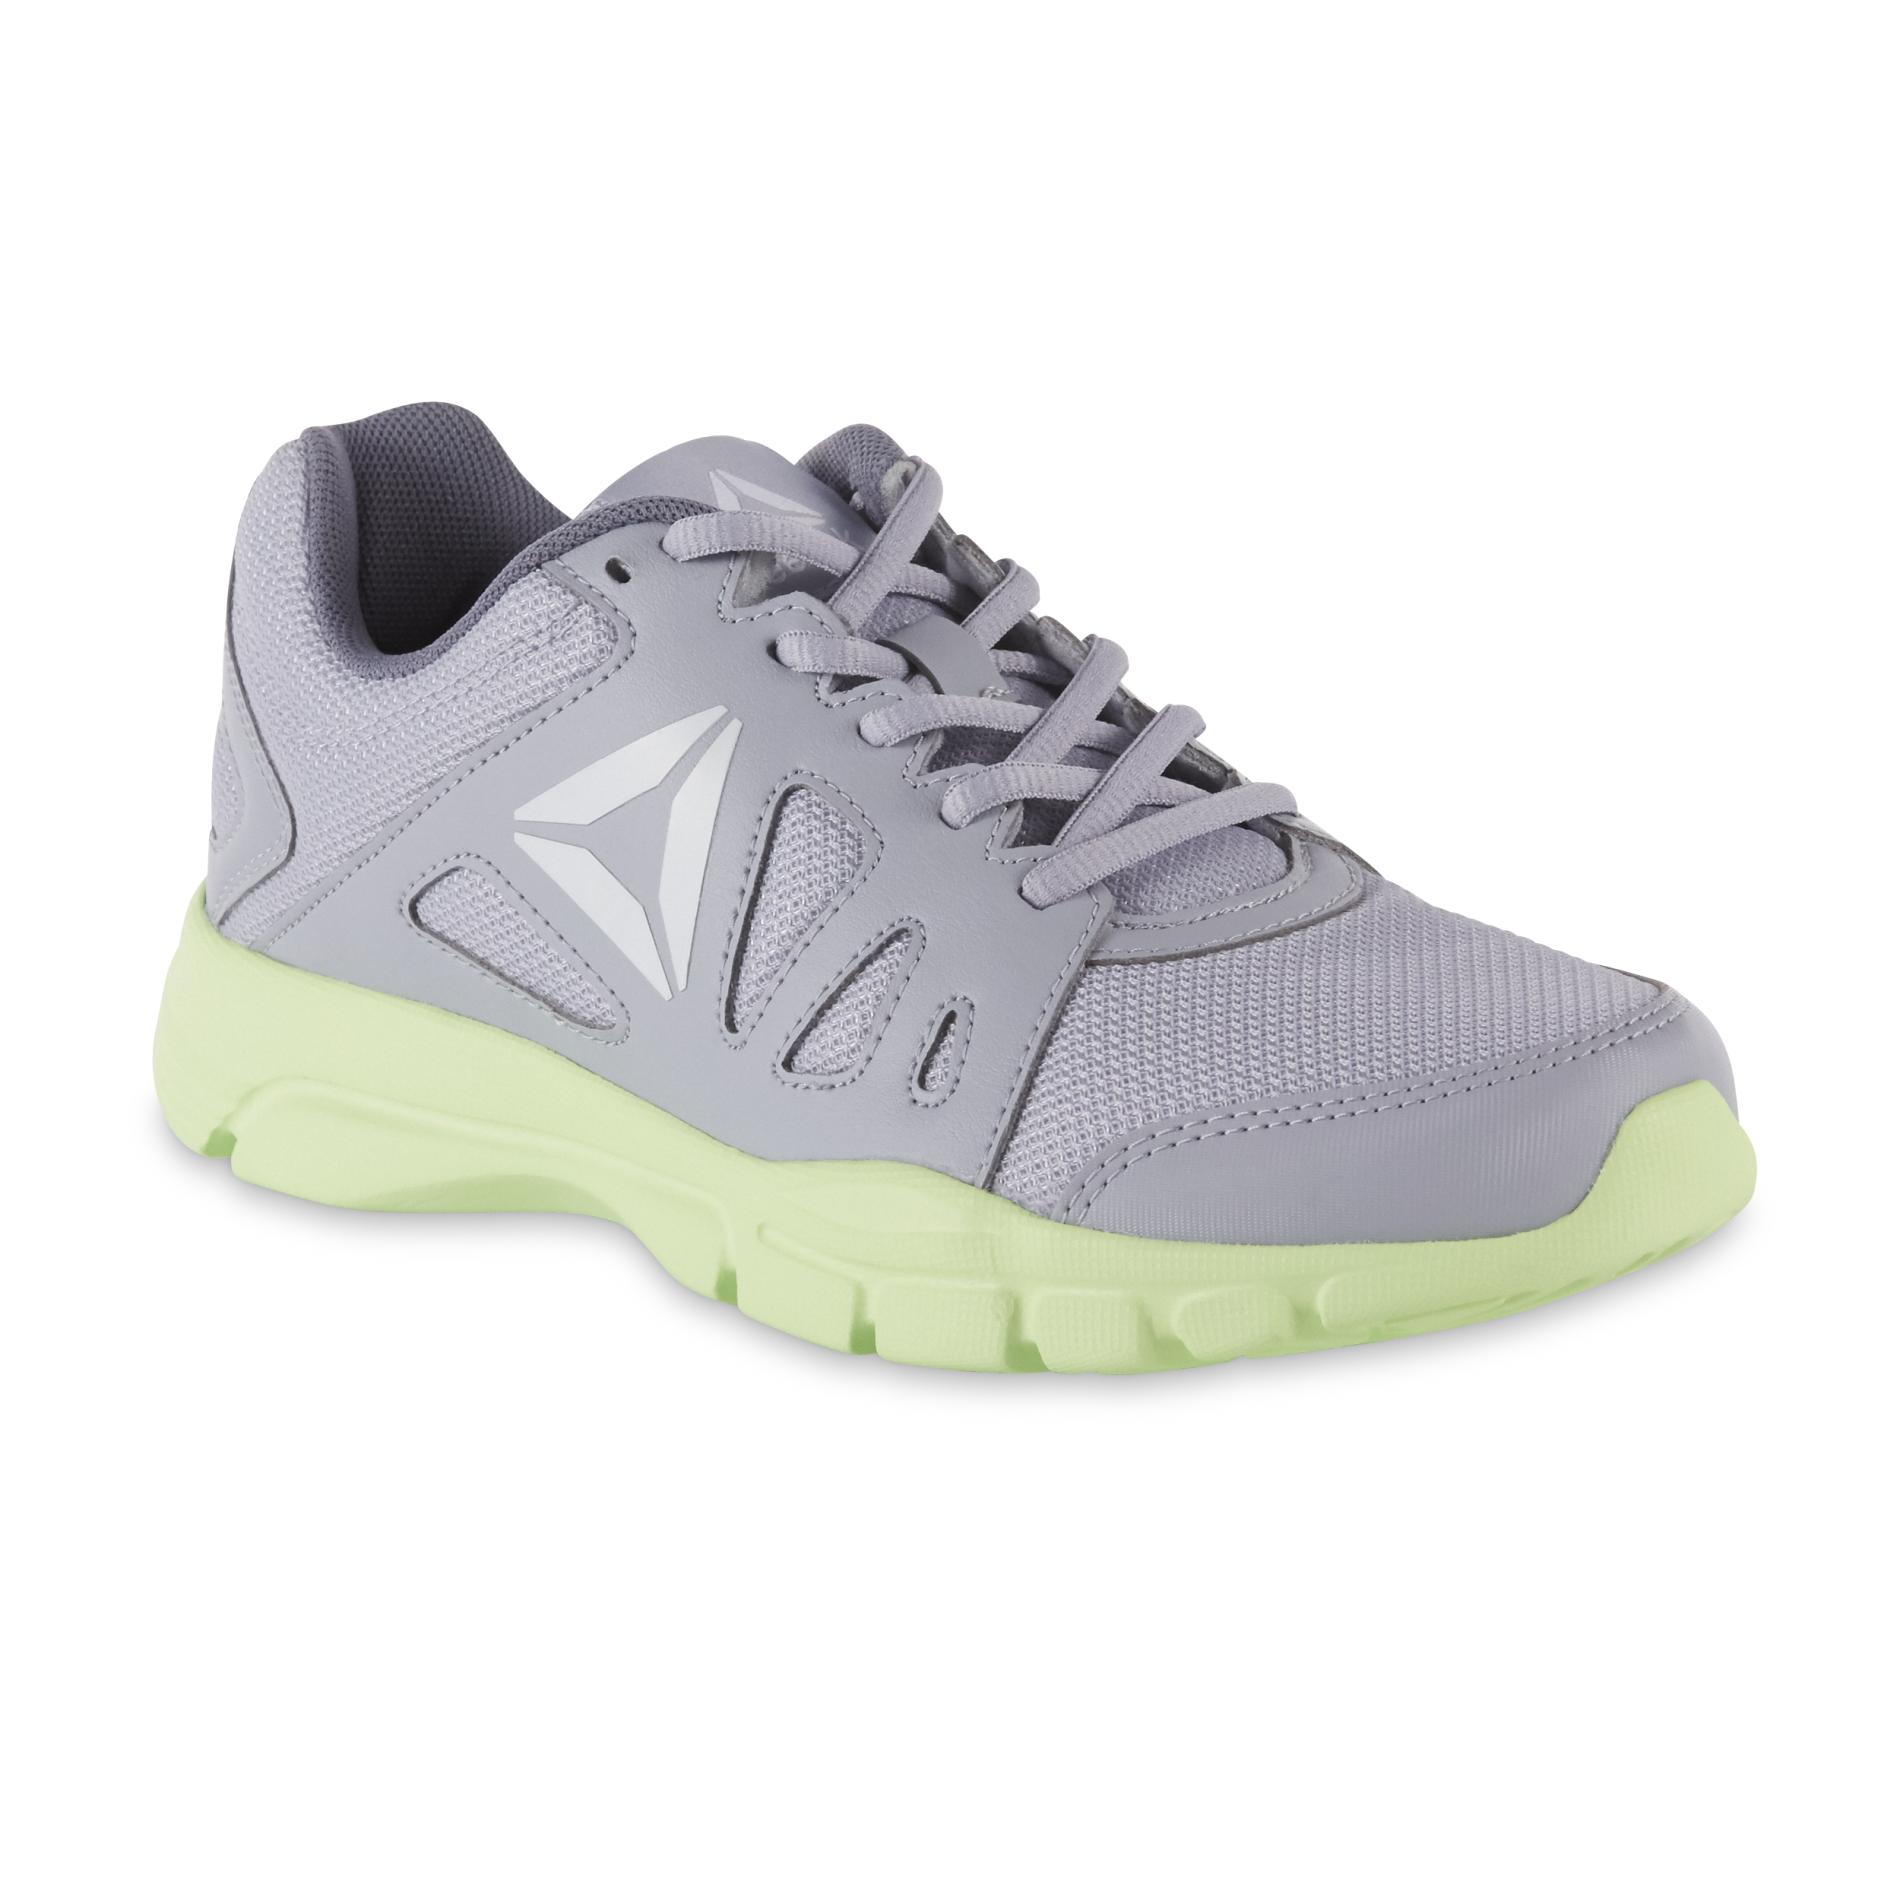 Women\u0027s fitness and cross training shoes at Sears.com